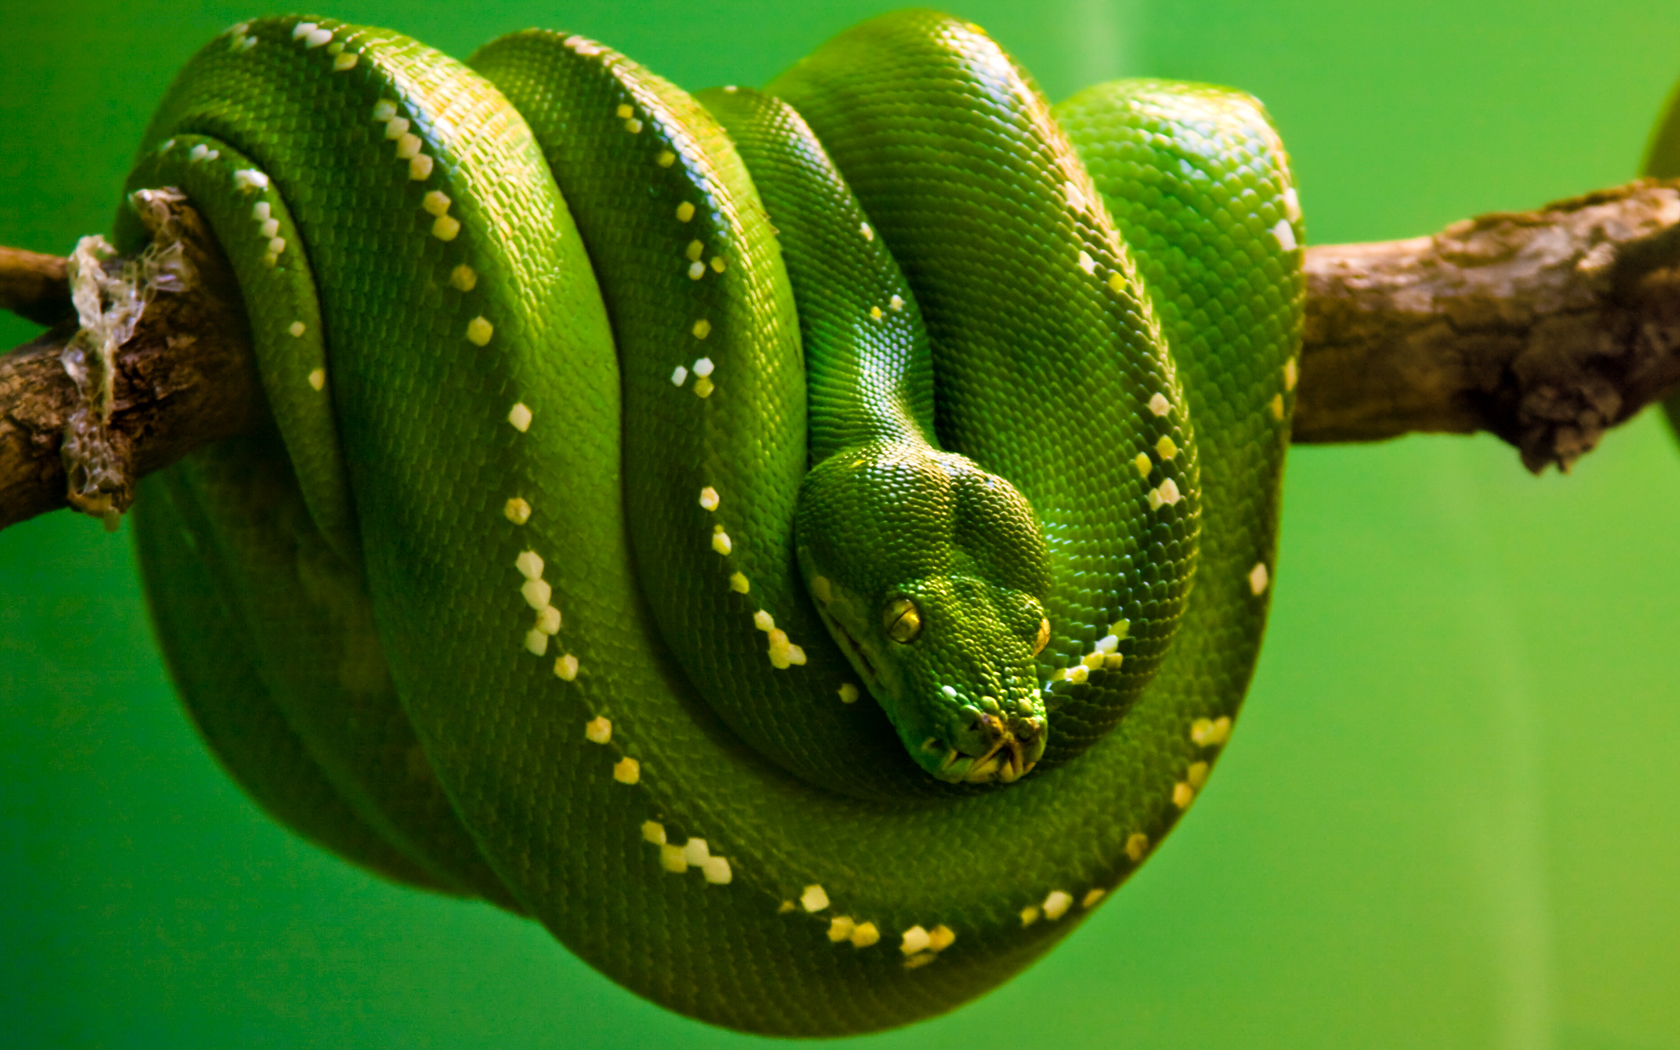 Green Snake Image - ID: 279817 - Image Abyss